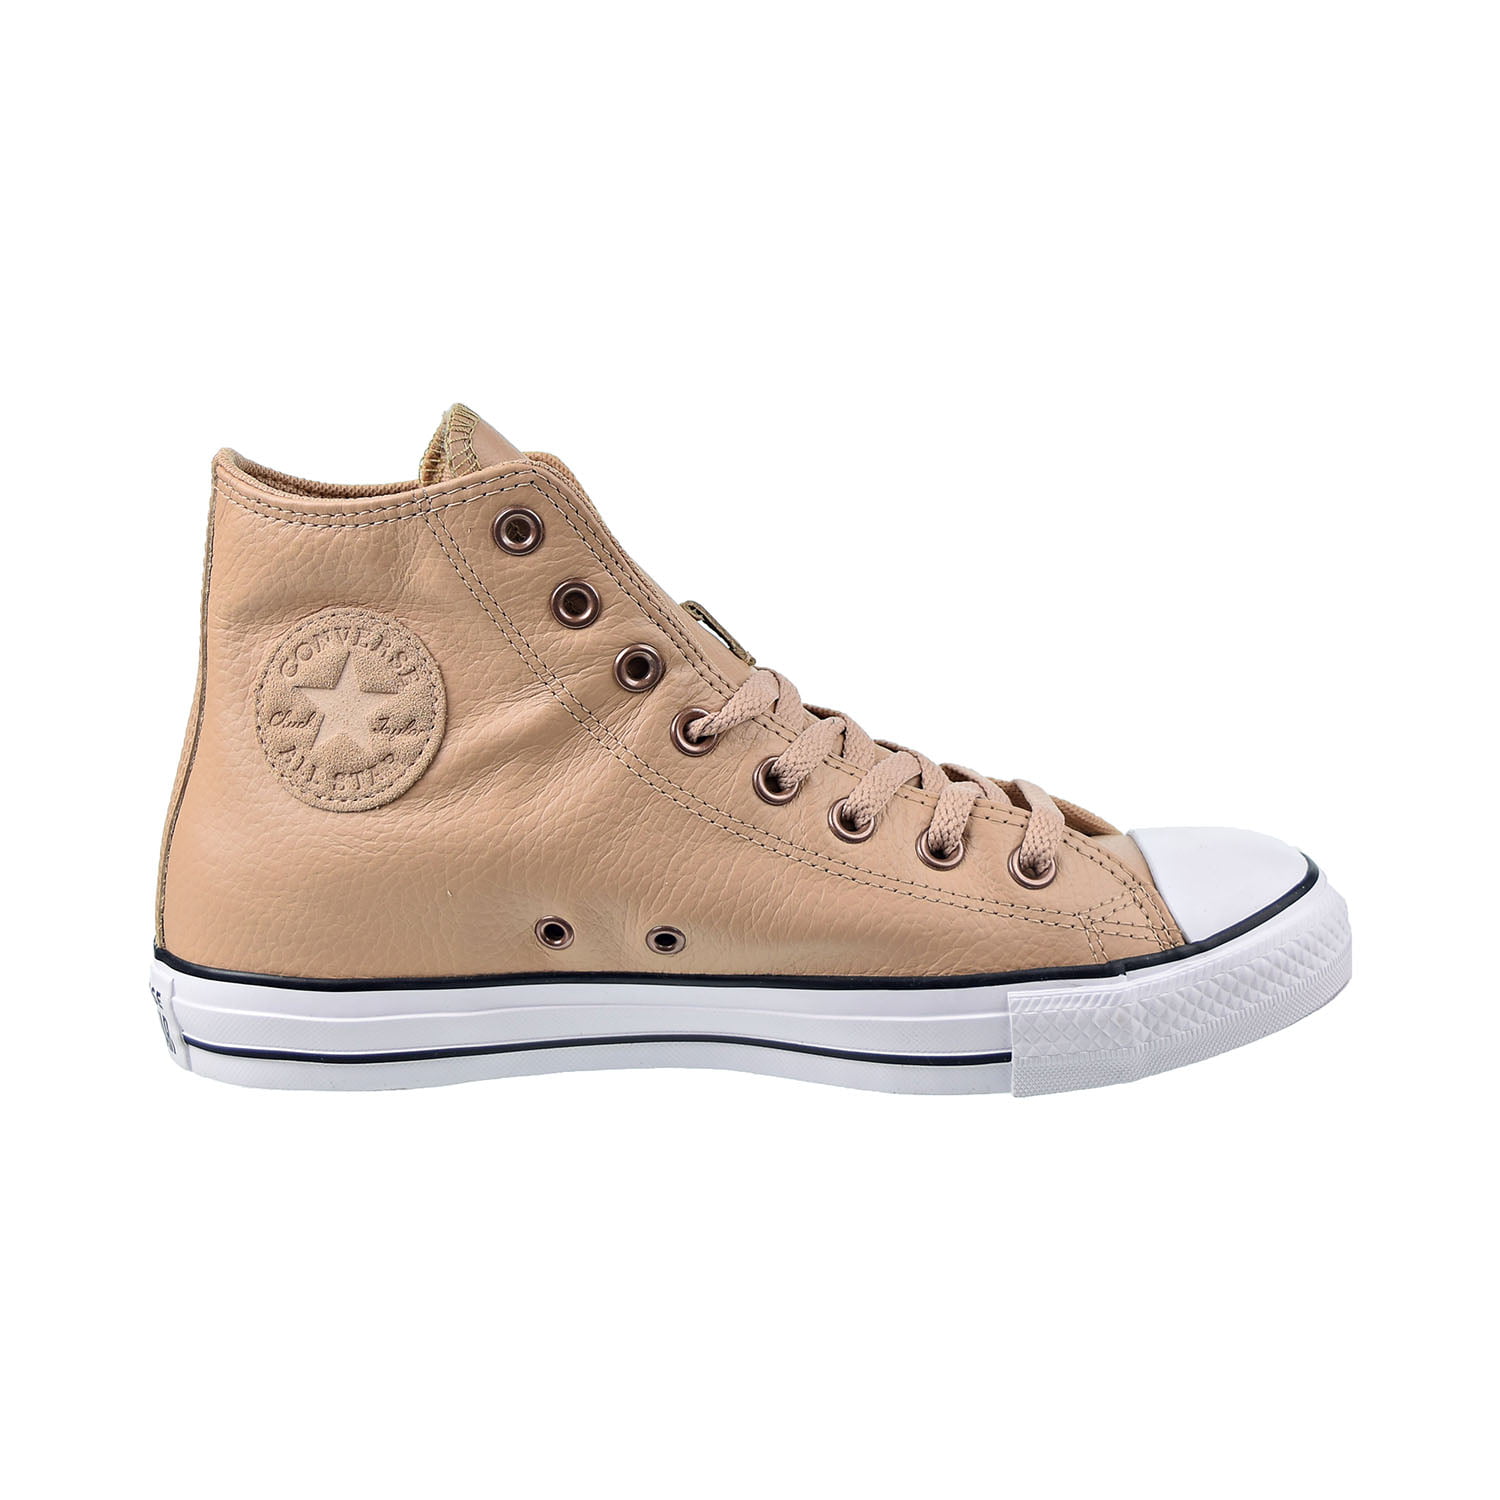 converse chuck taylor all star leather hi shoes